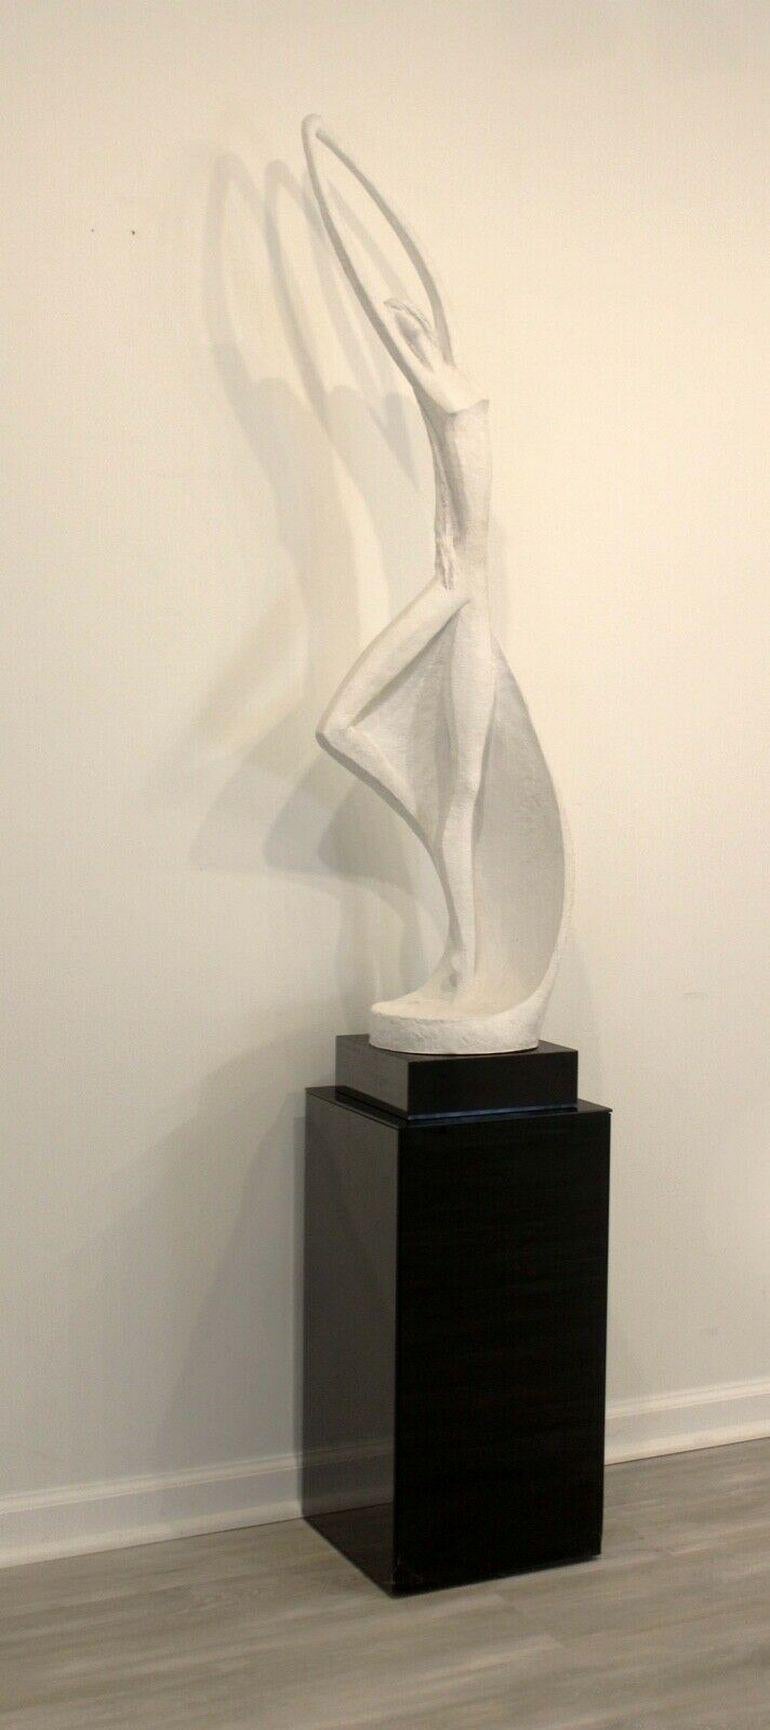 From Le Shoppe Too in Michigan, this cast plaster sculpture is figurative in nature depicting a woman in movement. Sitting atop a marble base, this sculpture would be an elegant addition to any aesthetic. Signed by Austin Productions and dated